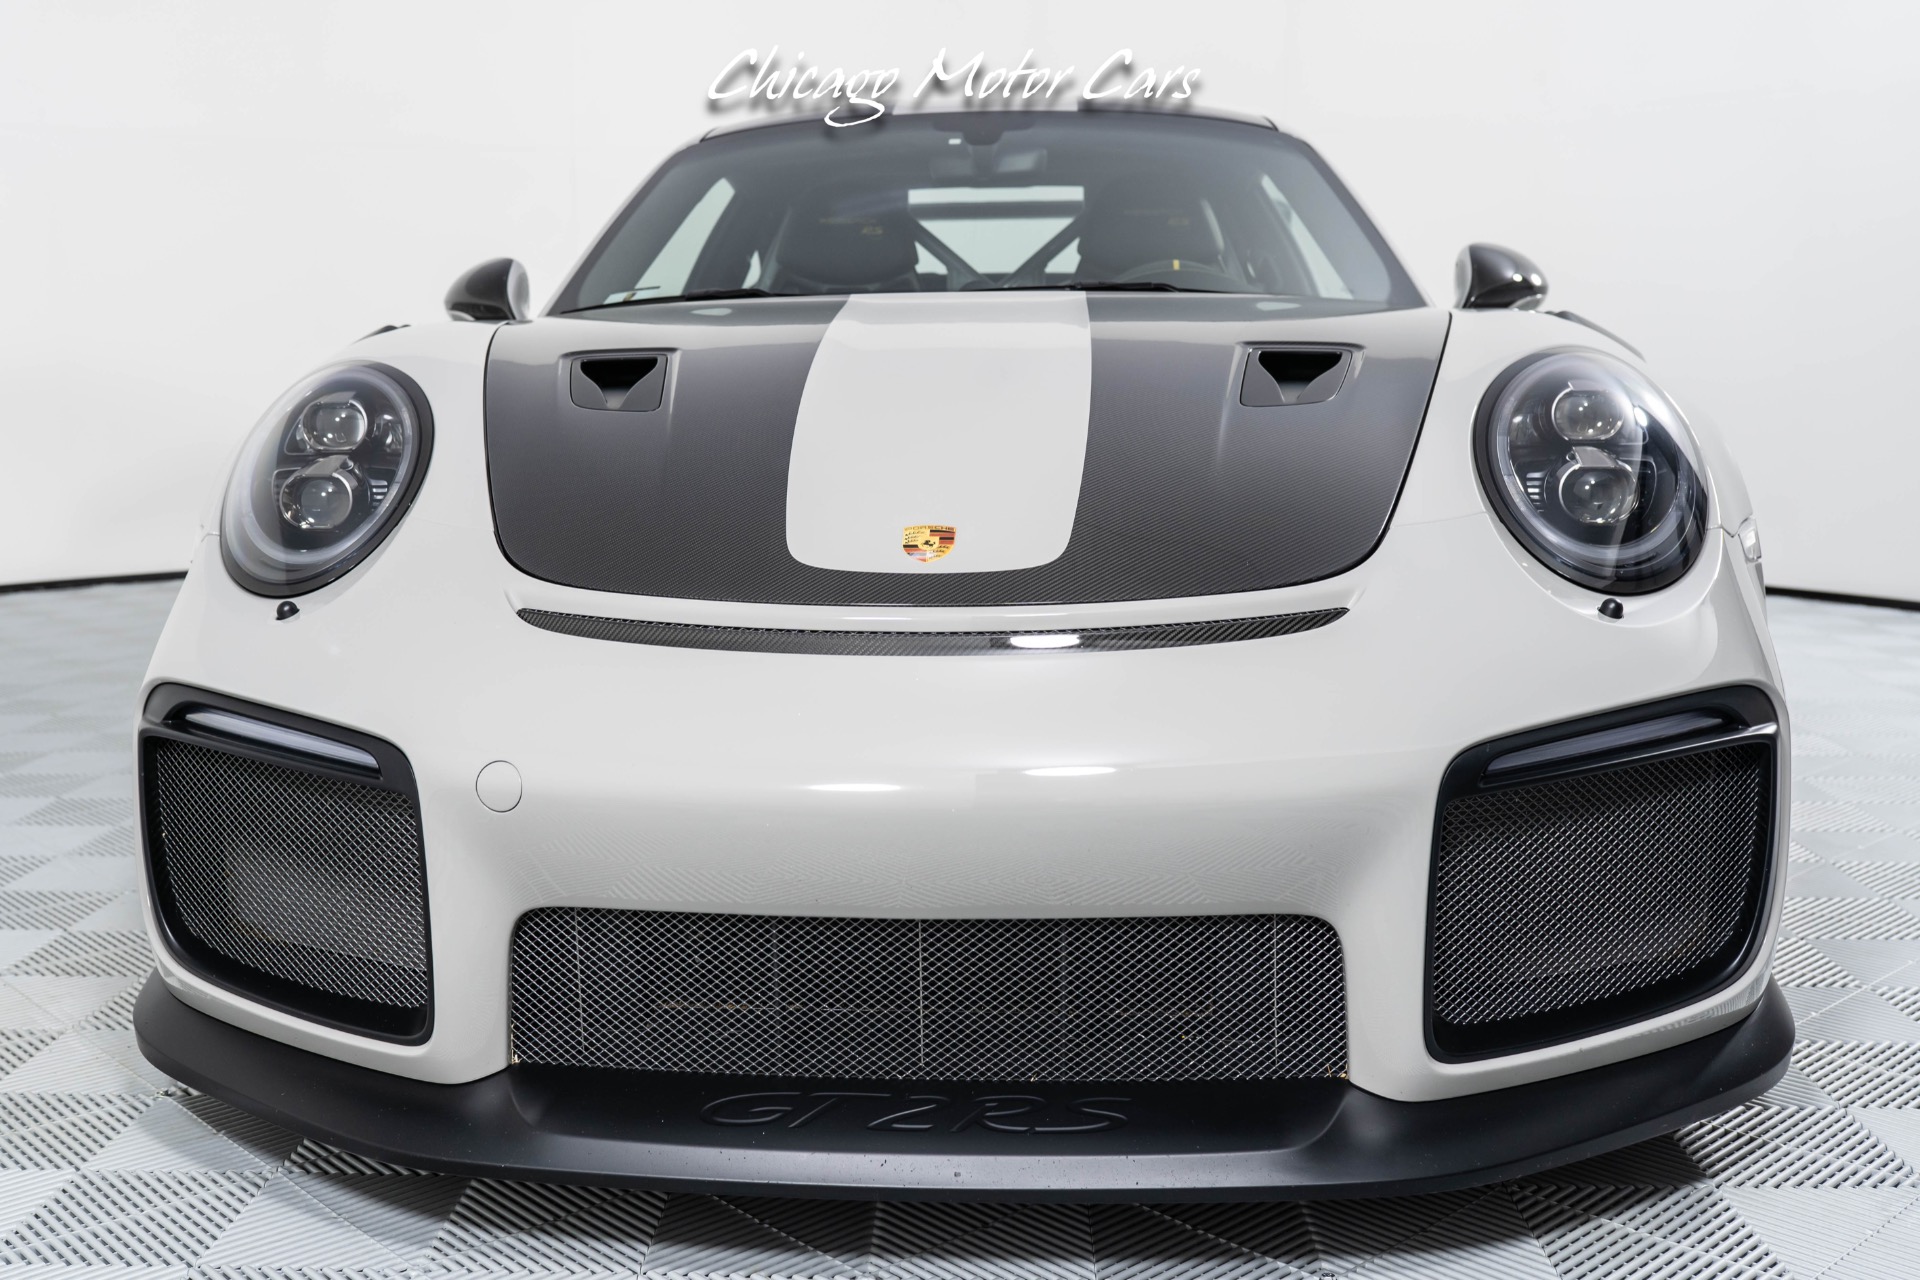 Used-2018-Porsche-911-GT2-RS-FULL-PFF-WEISSACH-PACKAGE-MAGNESIUM-WHEELS-FRONT-AXLE-LIFT-LOADED